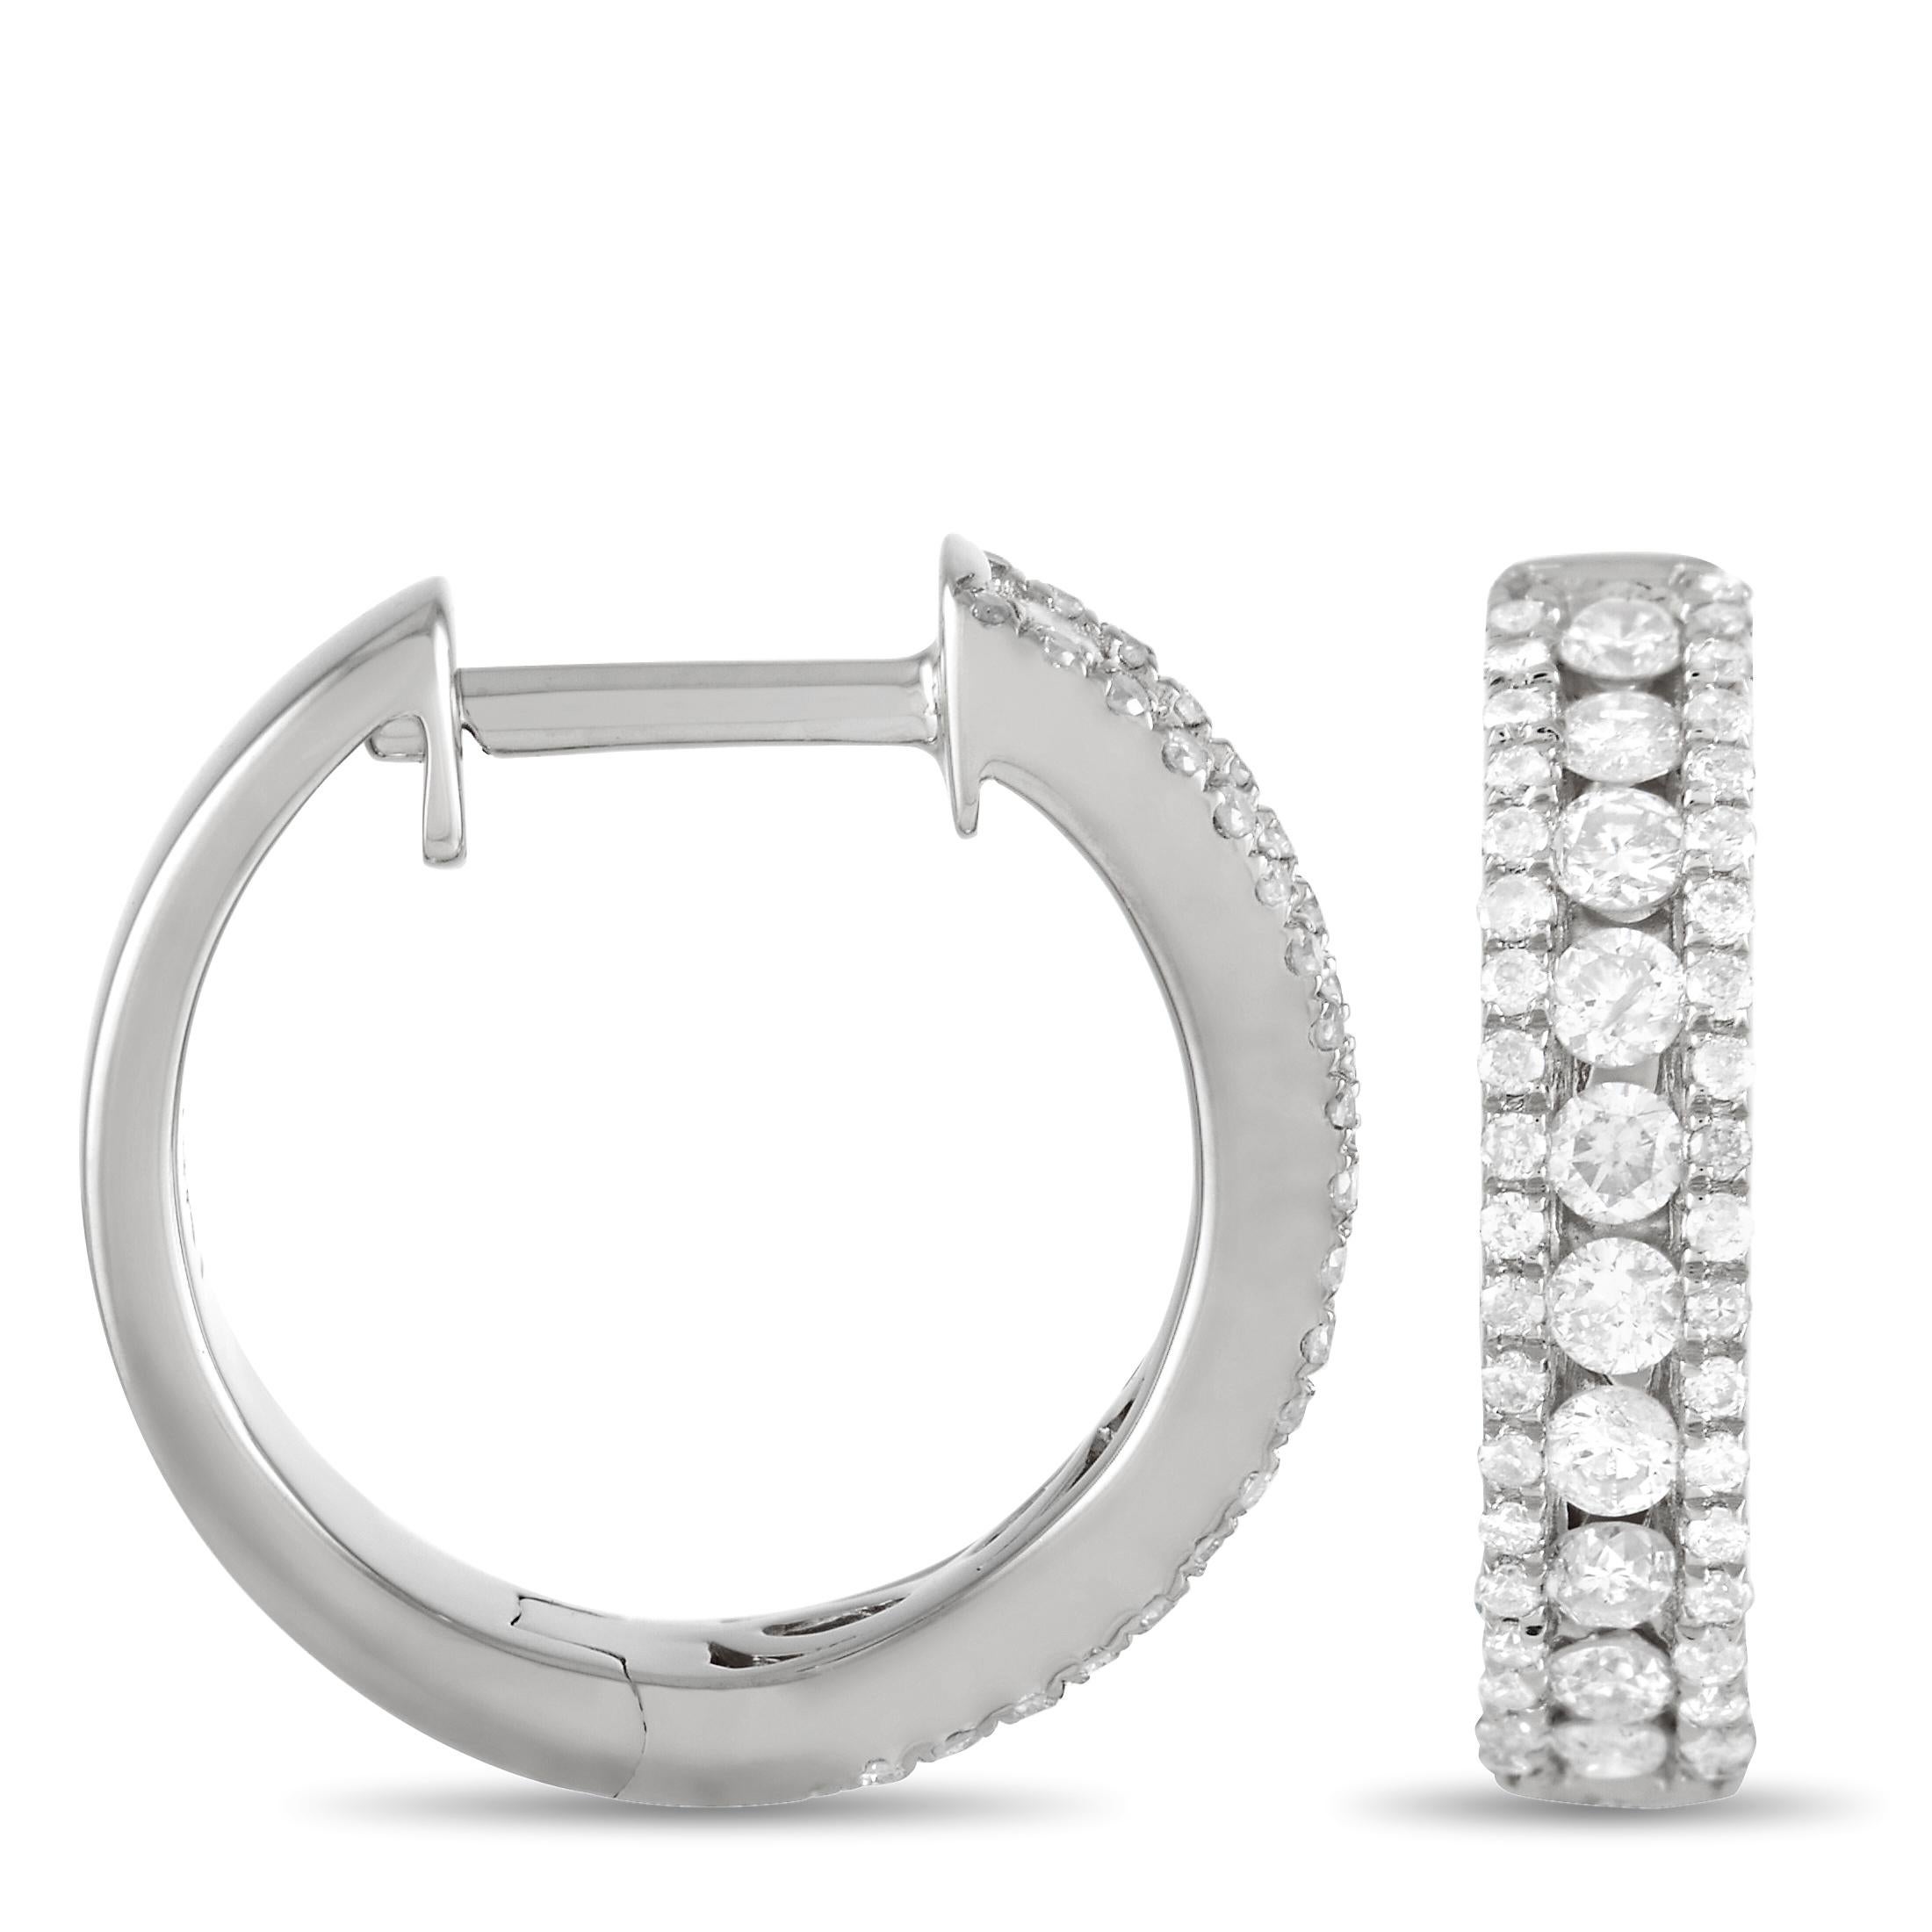 A timeless pairing of 14K white gold and shimmering diamonds make these earrings simply exquisite. Each one measures 0.5” round and showcases three rows of diamonds, which together possess a total weight of 0.50 carats. 

This jewelry piece is